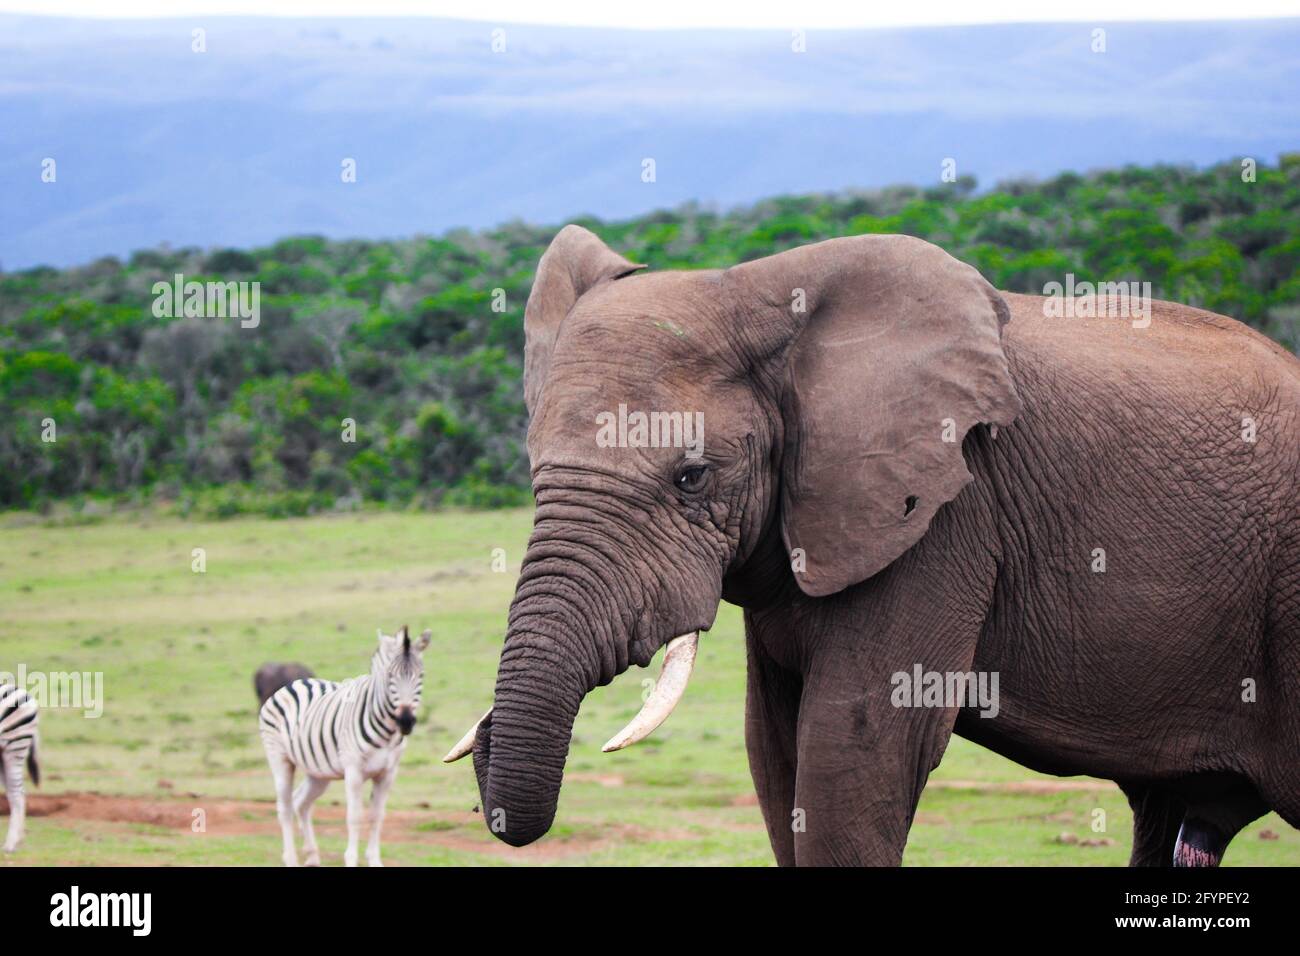 African Elephants in South Africa, Elephants of South Africa Stock Photo